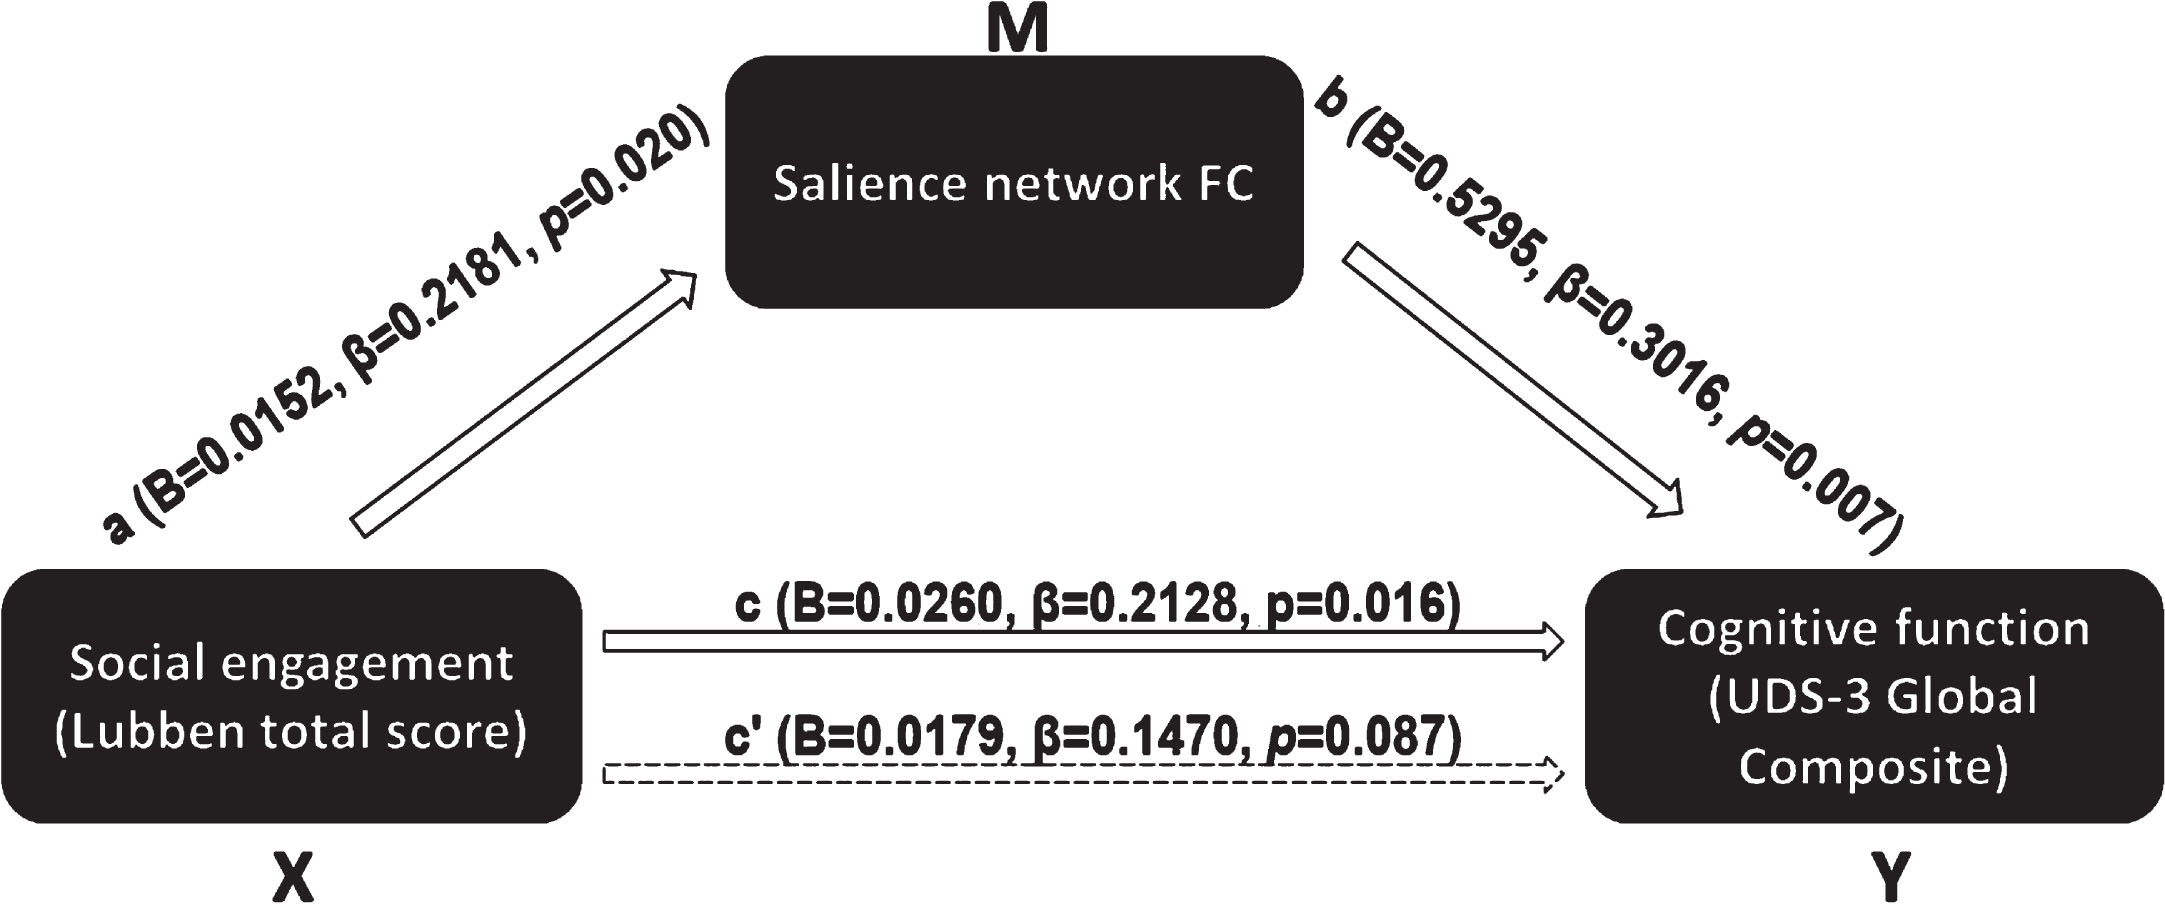 Mediation model of salience network FC mediating the association between overall social engagement and global cognition.